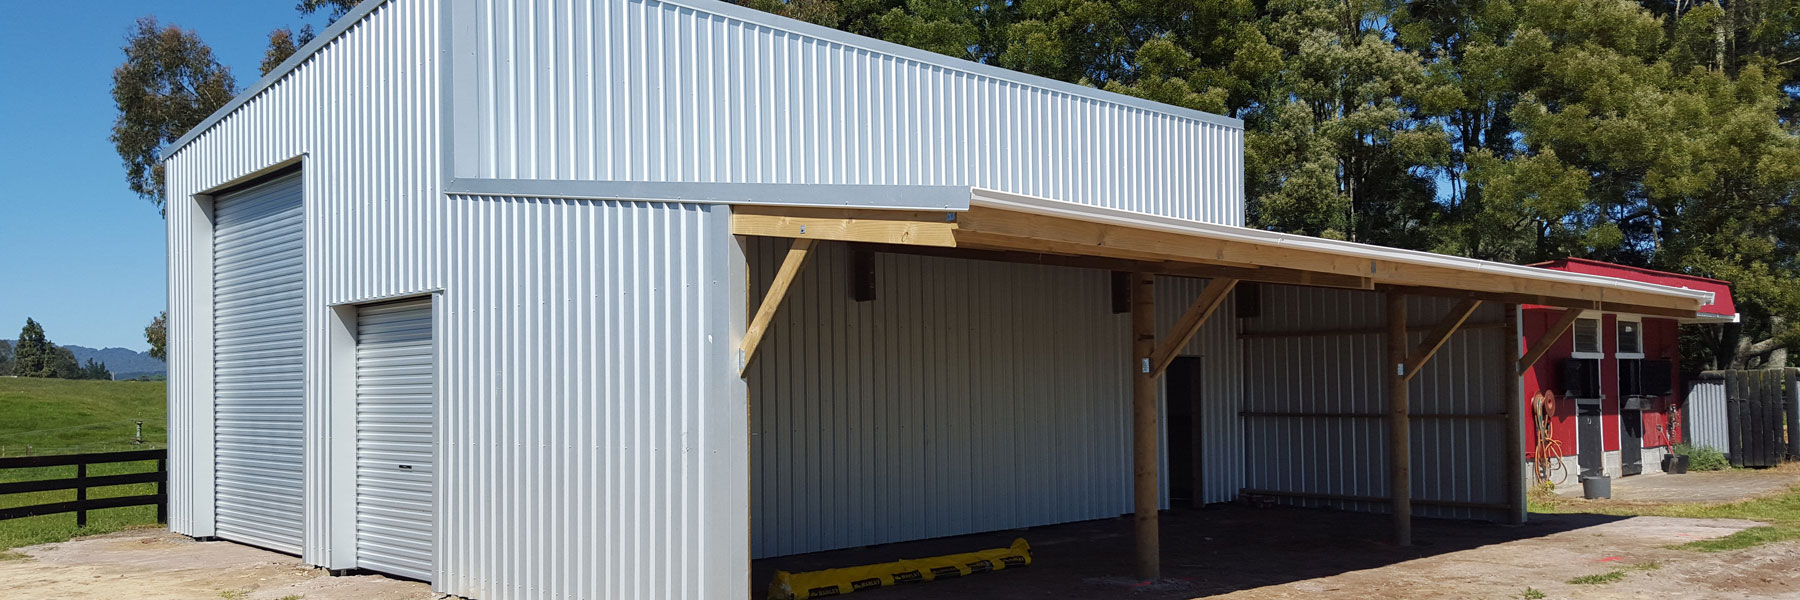 Residential / Lifestyle Sheds & Services